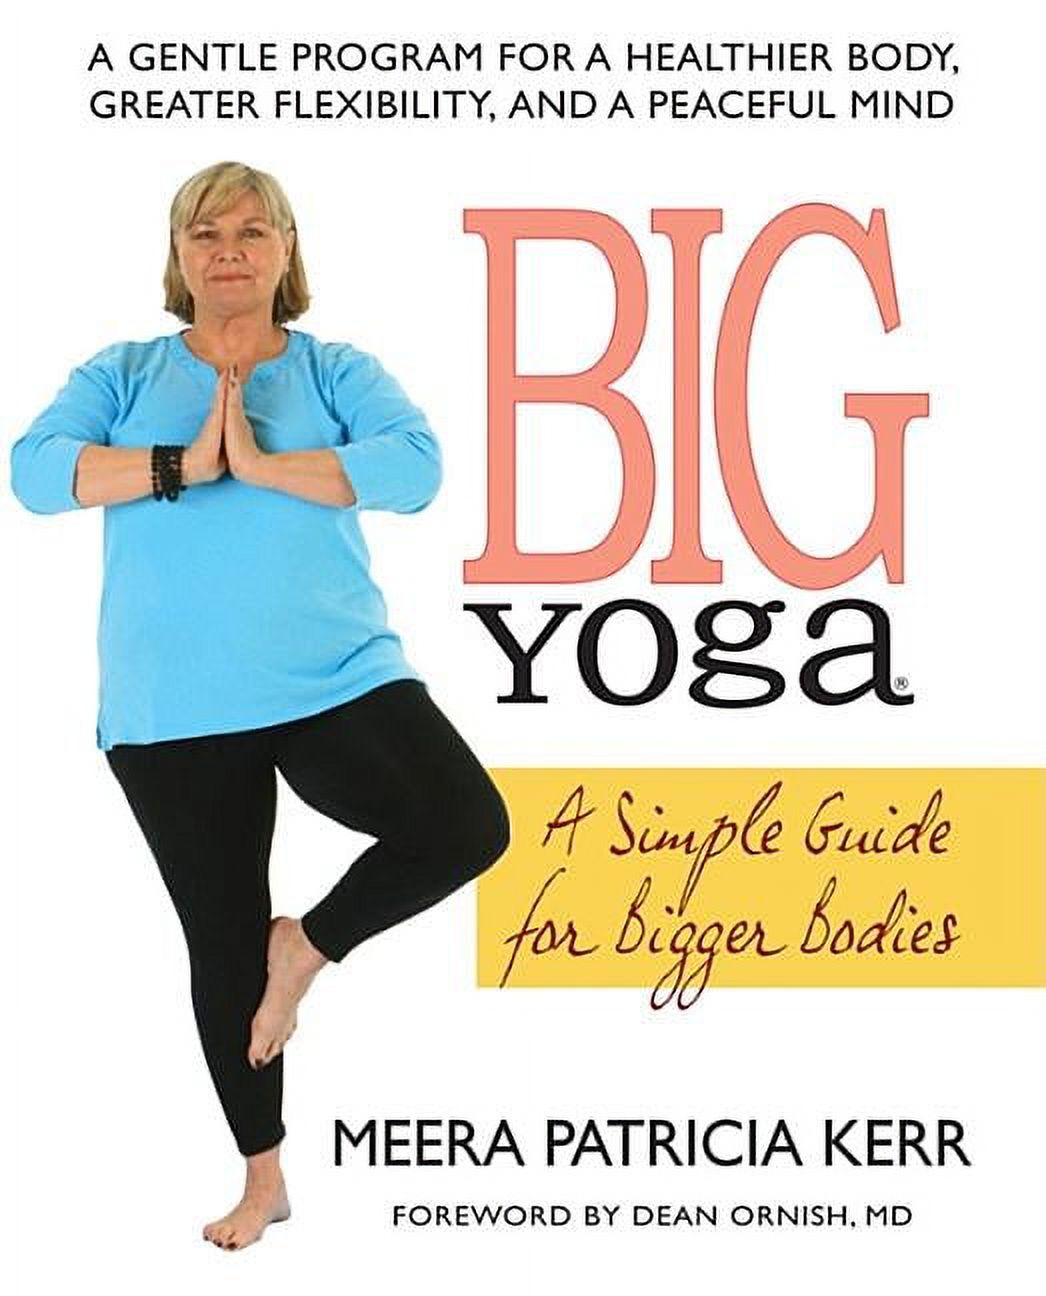 Big Yoga: A Simple Guide for Bigger Bodies (Paperback) - image 1 of 1